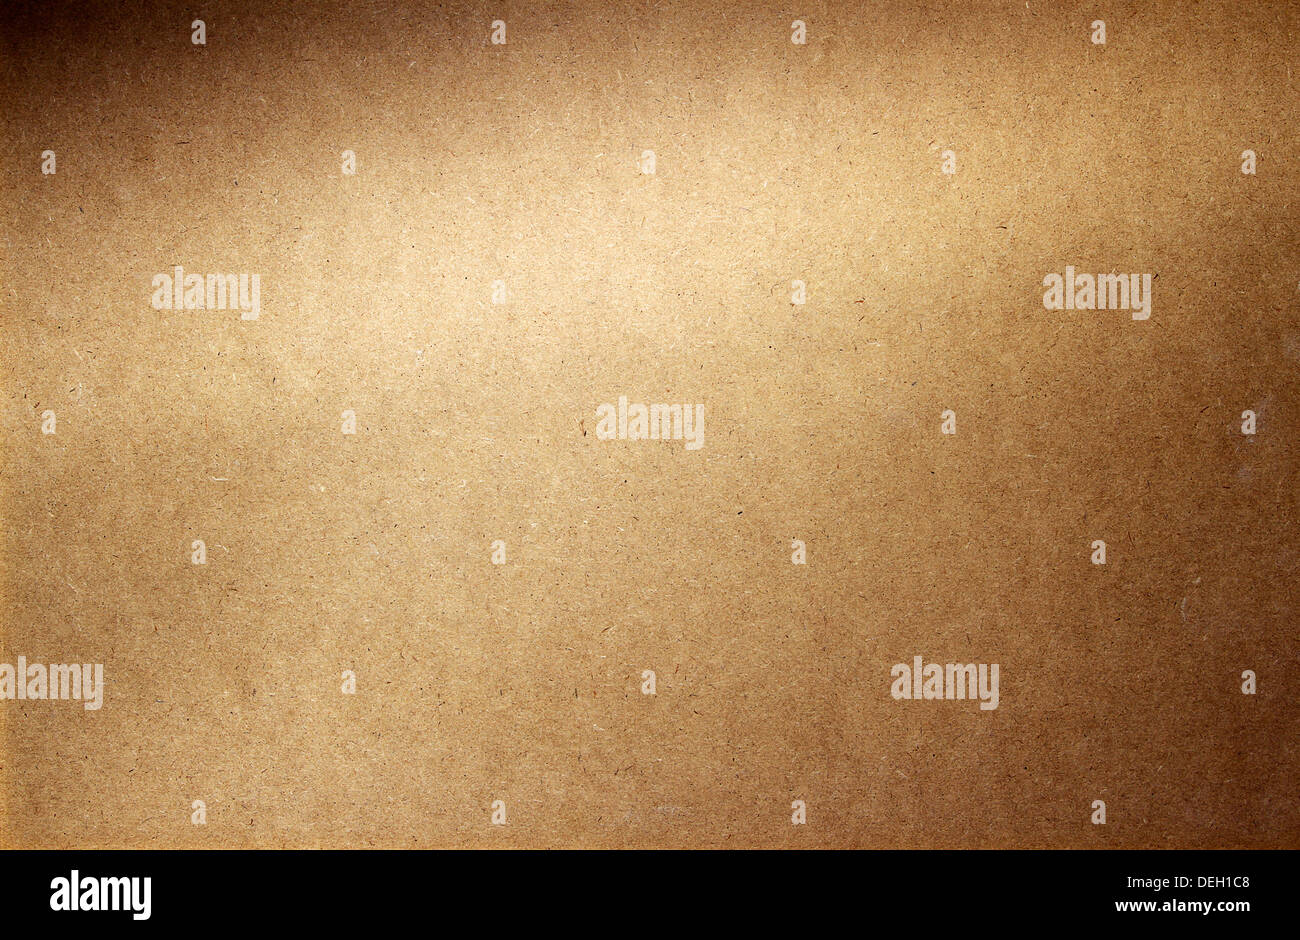 Closeup of textured brown background Stock Photo